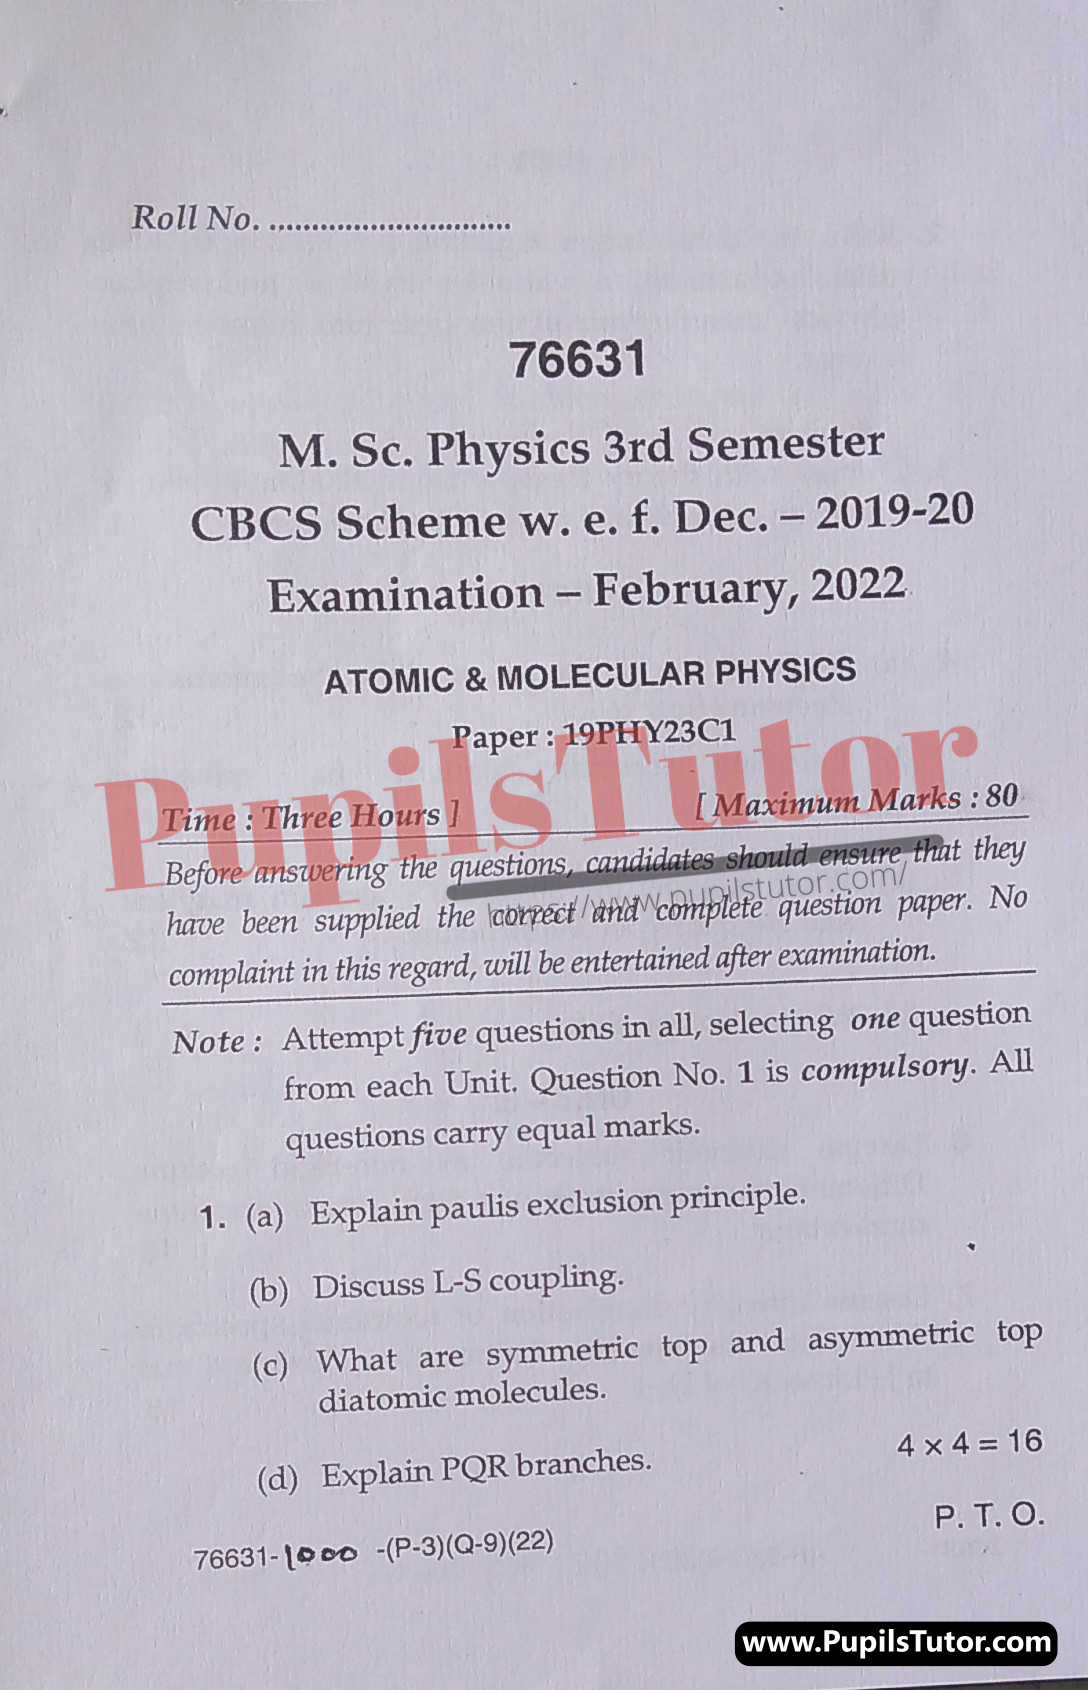 MDU (Maharshi Dayanand University, Rohtak Haryana) MSc Physics CBCS Scheme Third Semester Previous Year Atomic And Molecular Physics Question Paper For February, 2022 Exam (Question Paper Page 1) - pupilstutor.com